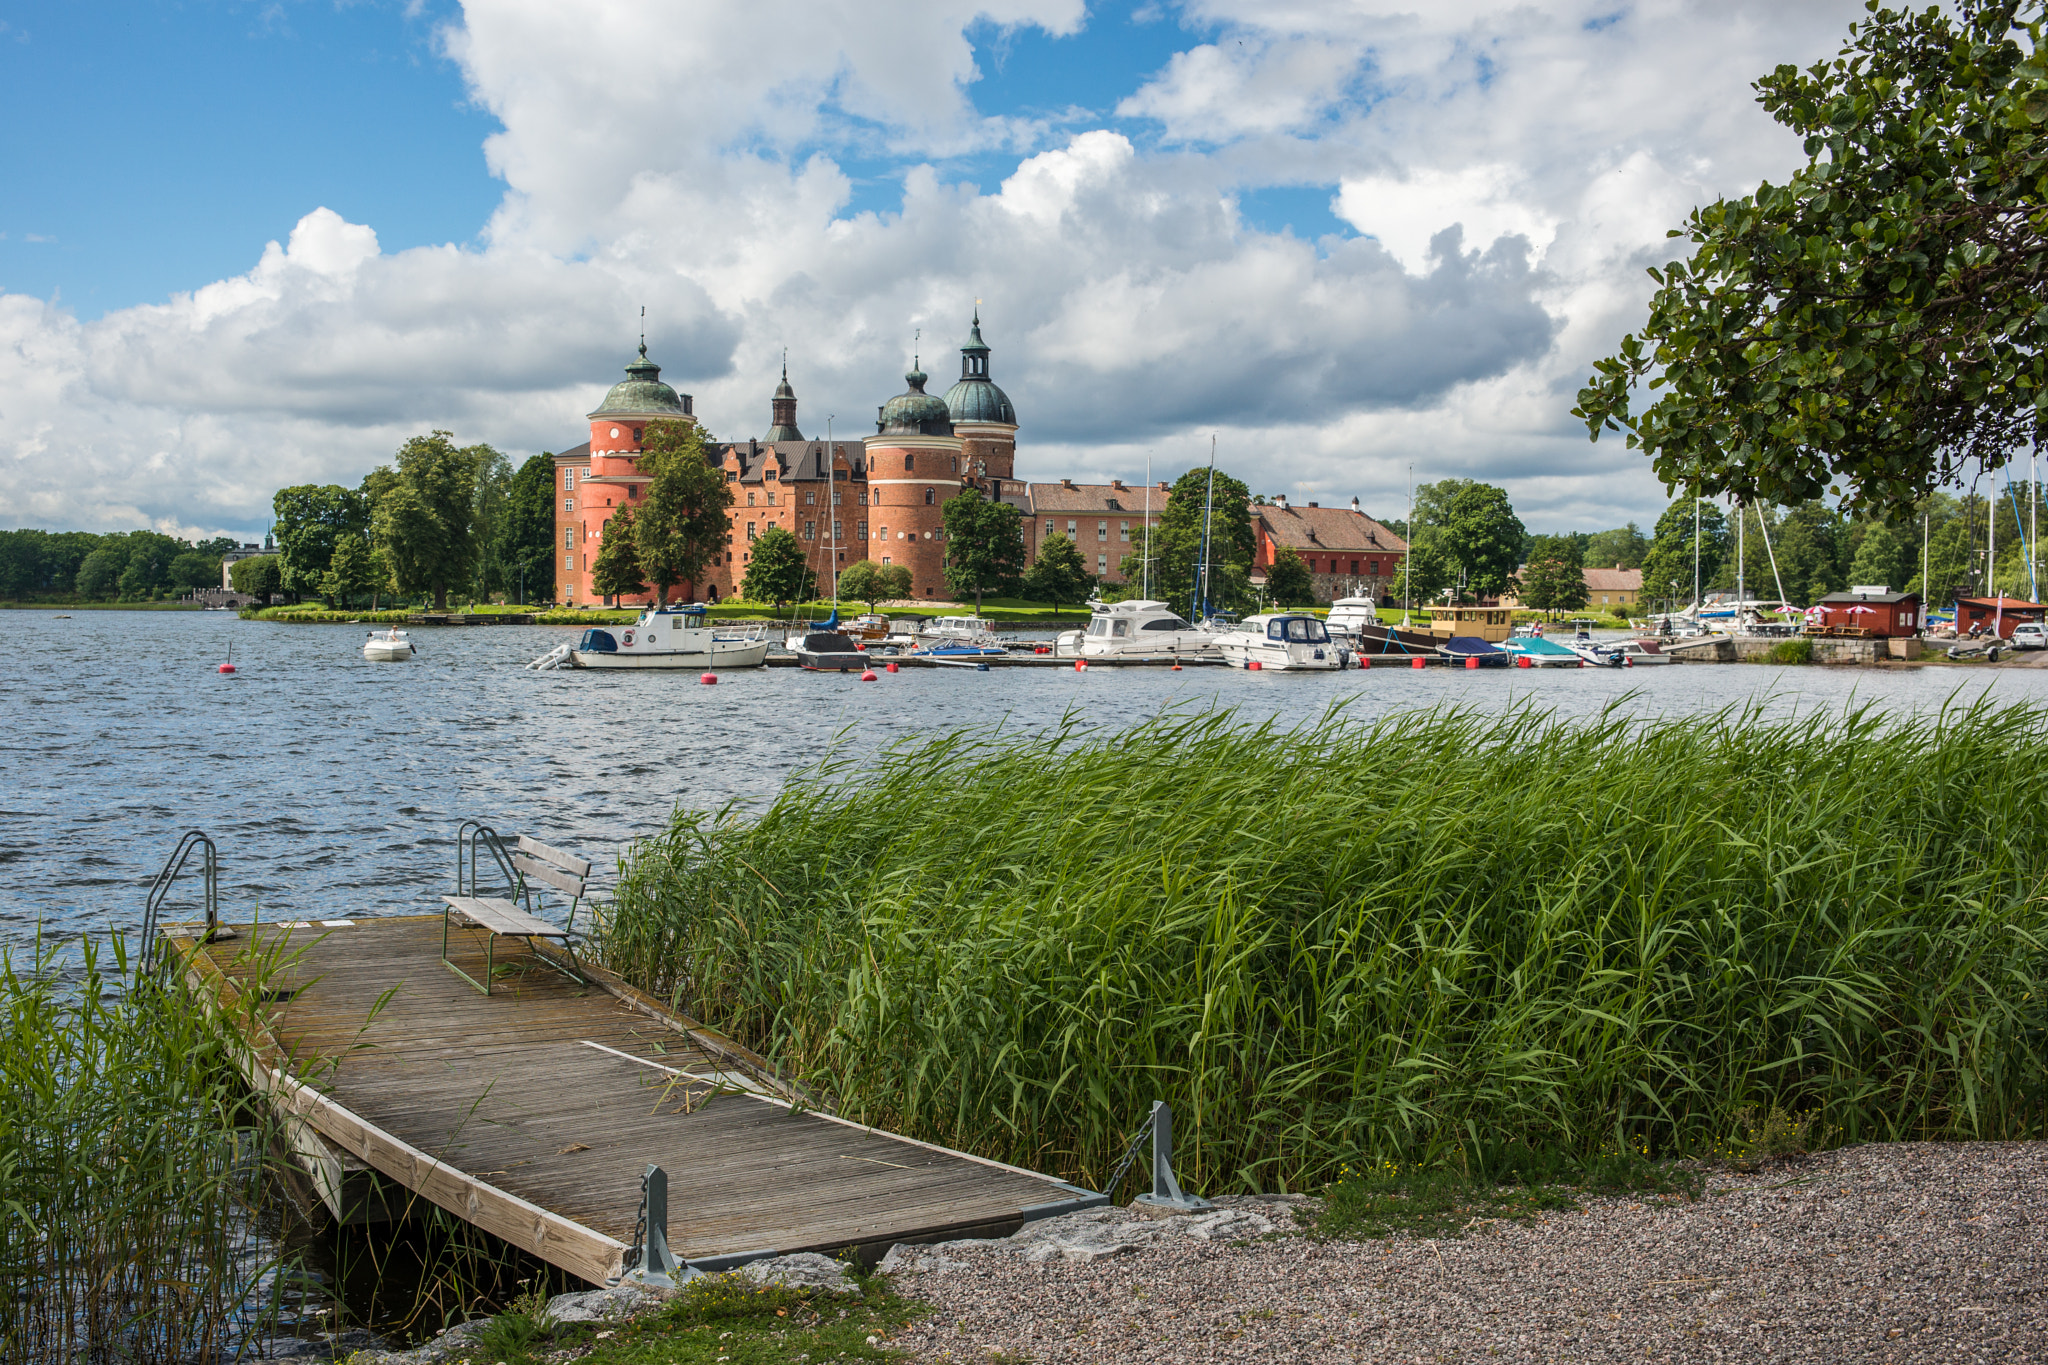 Sony a99 II + 24-70mm F2.8 sample photo. Schloss gripsholm, mariefred, sweden photography